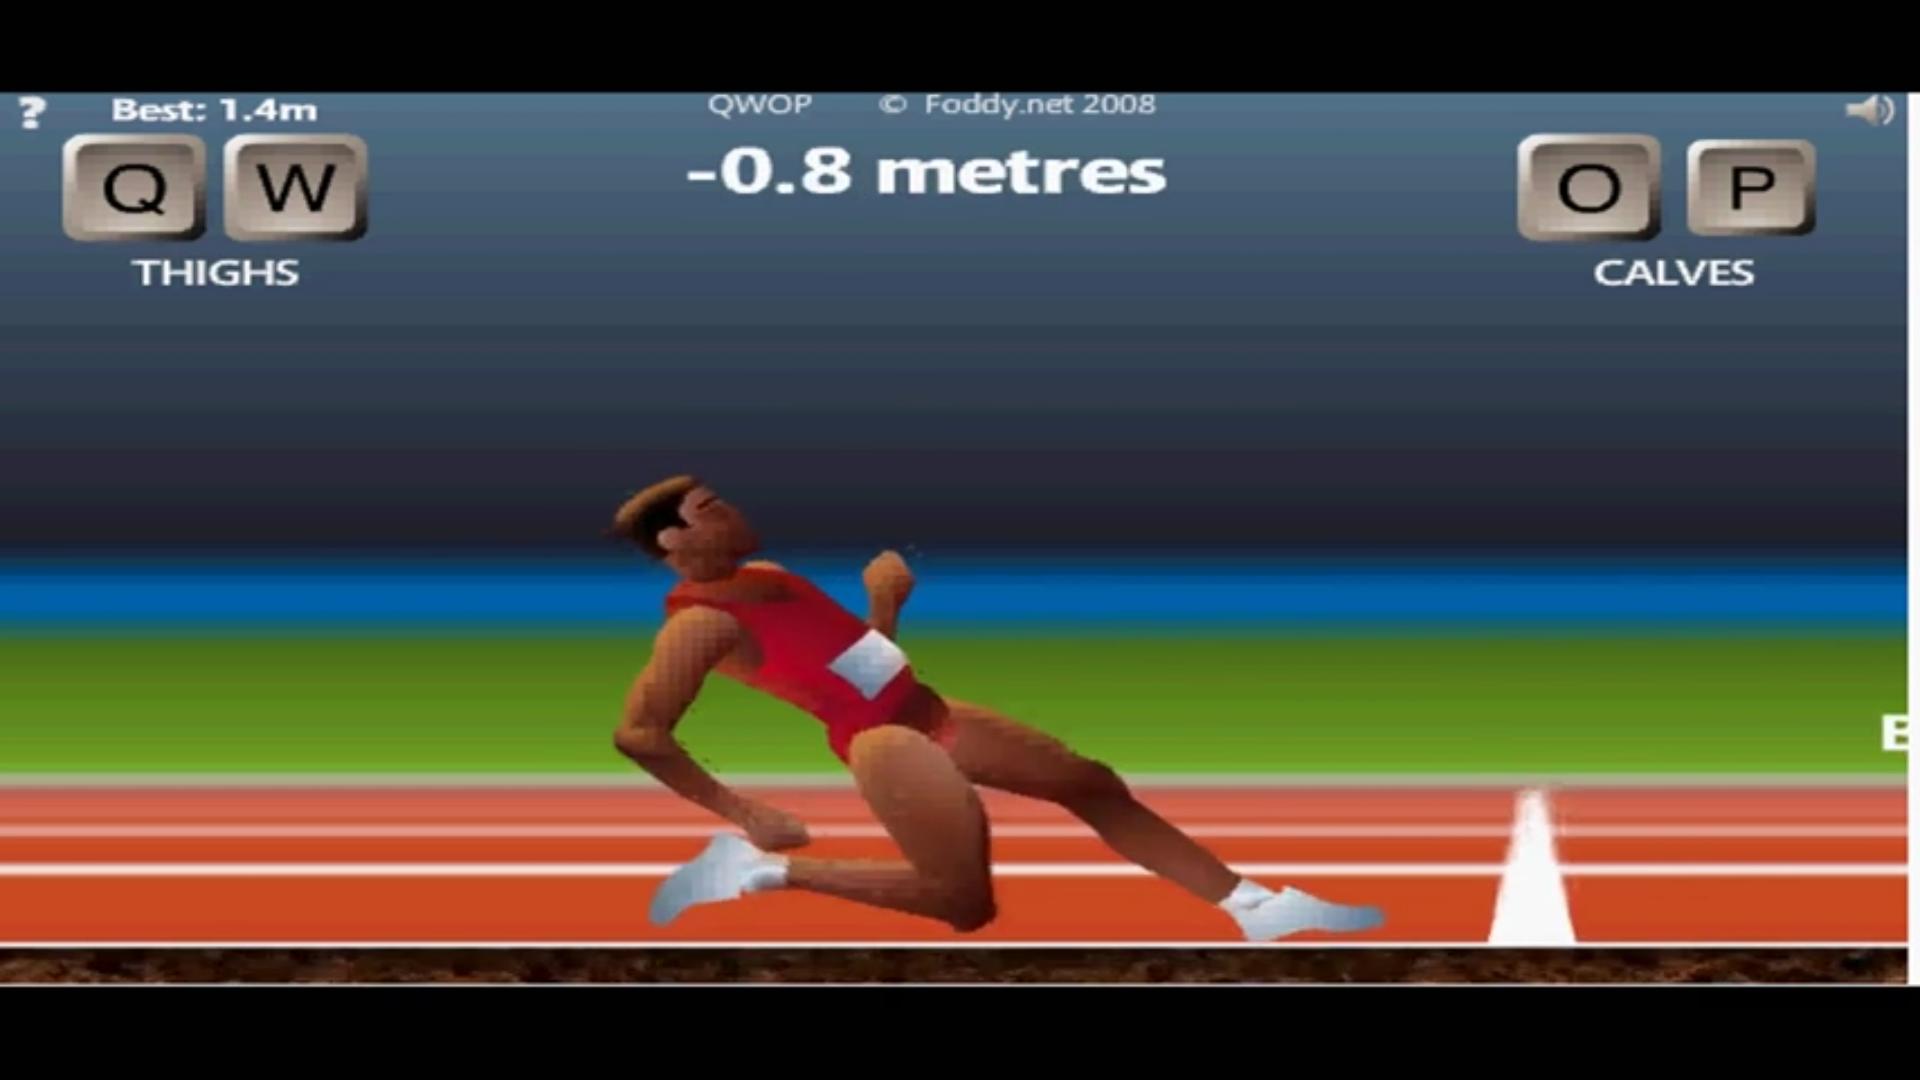 Play Qwop Speedrun Cours Game All Tricks For Android Apk Download - qwop roblox game